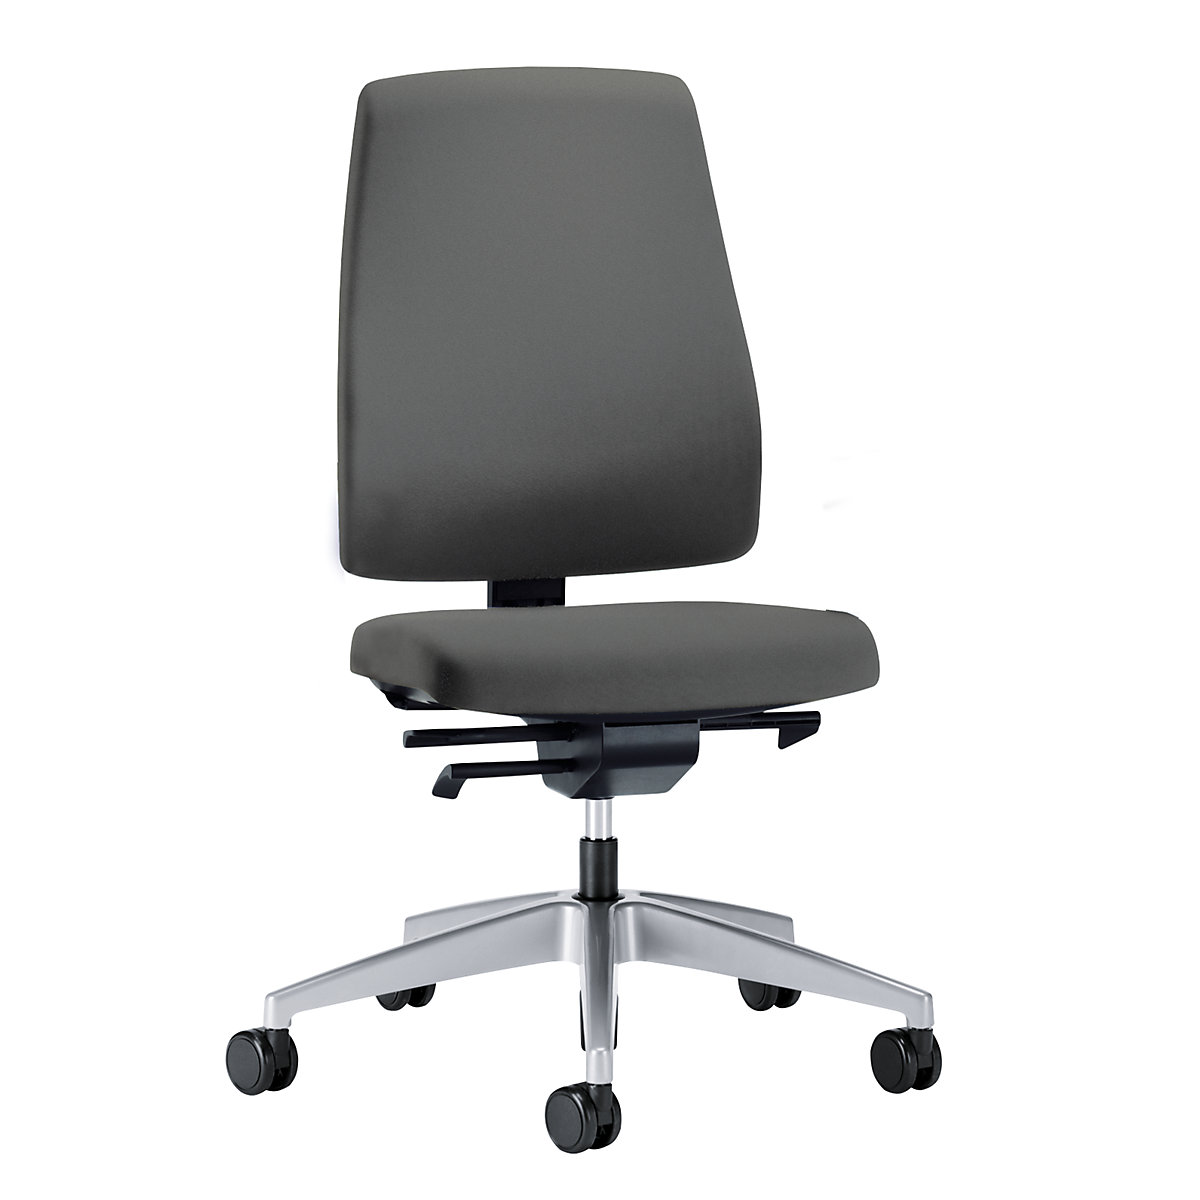 GOAL office swivel chair, back rest height 530 mm – interstuhl, brilliant silver frame, with hard castors, iron grey, seat depth 410 mm-3